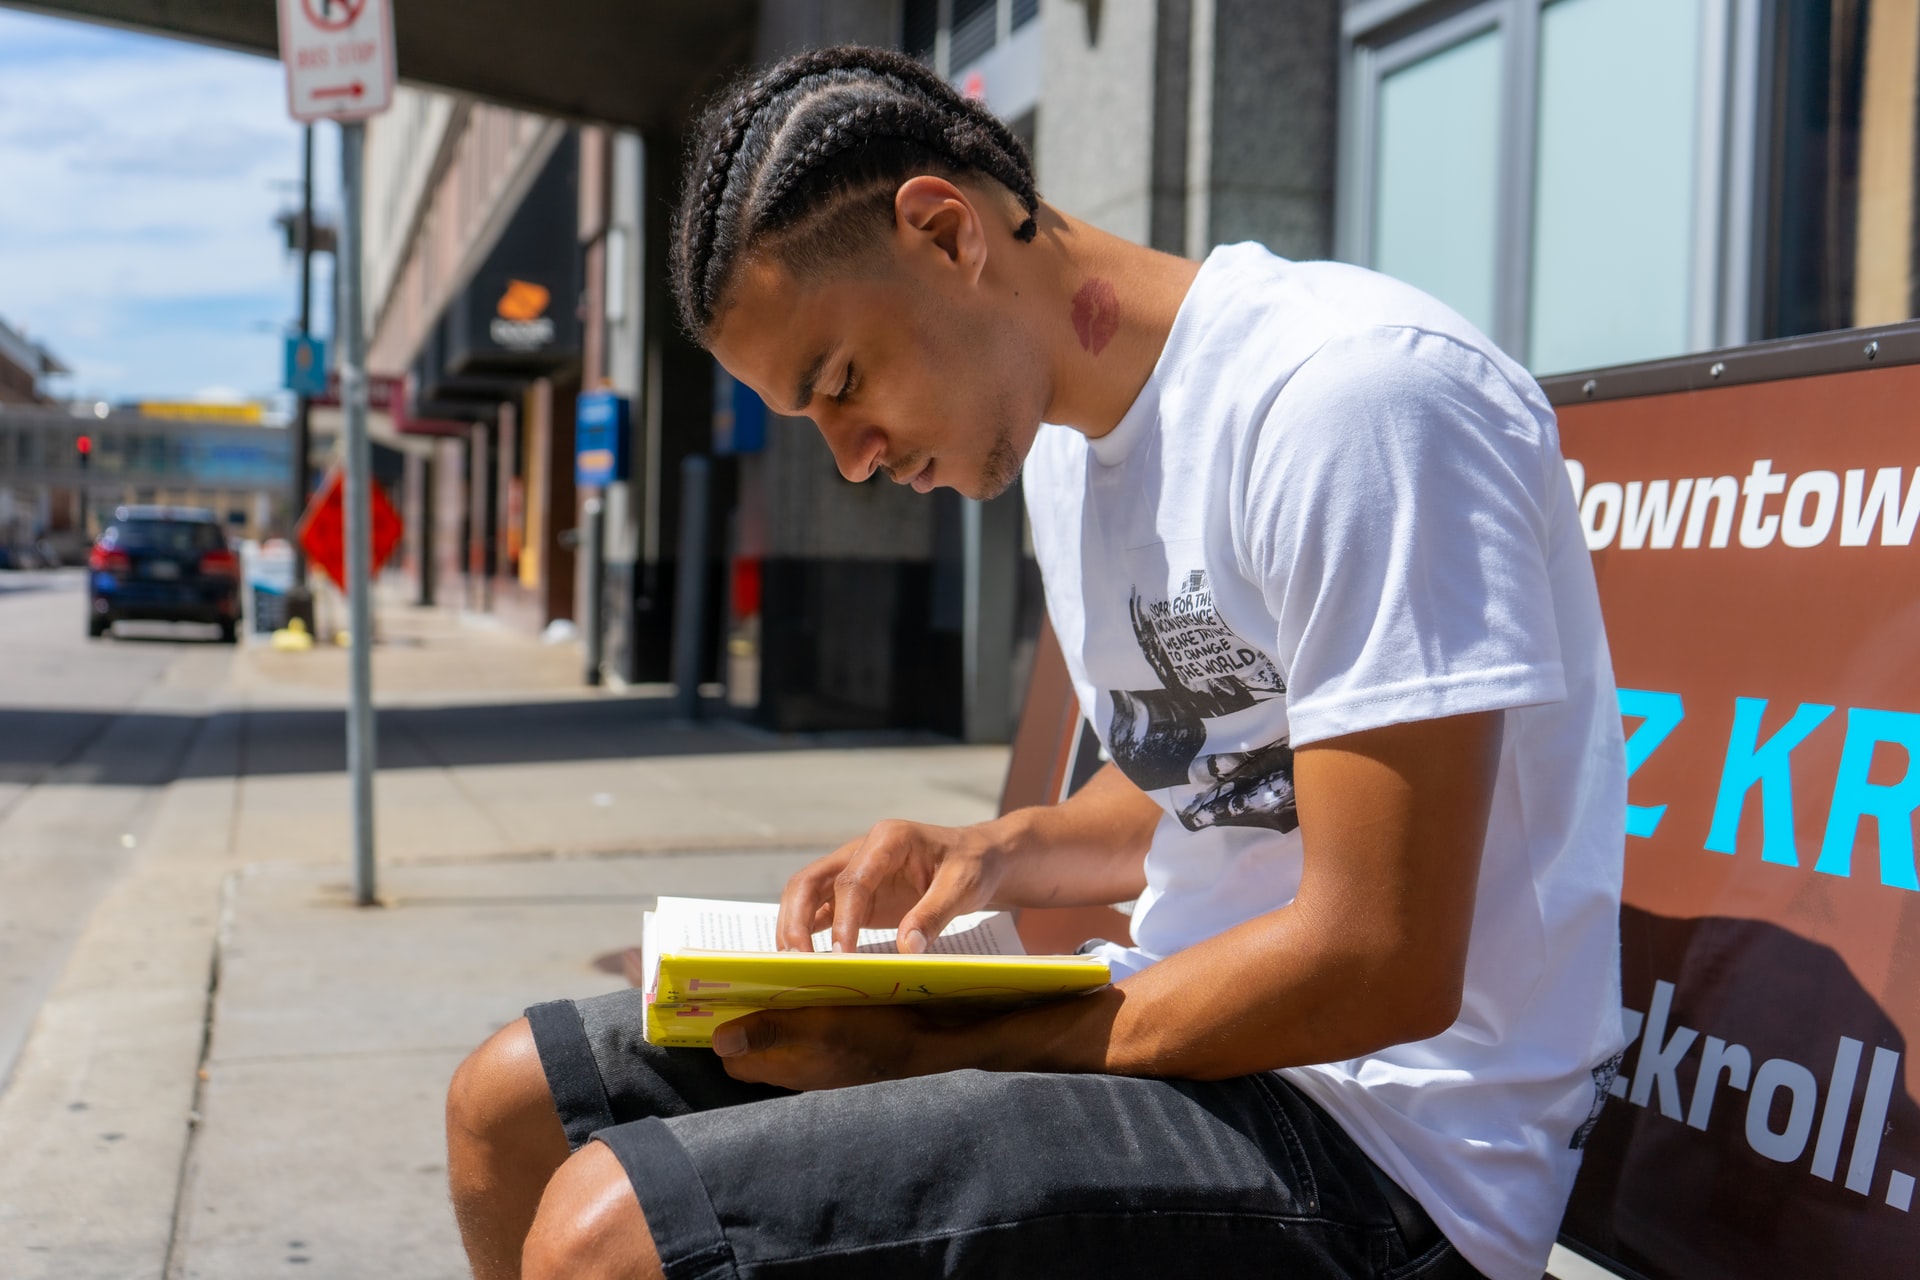 Man in a white shirt reading a book outside